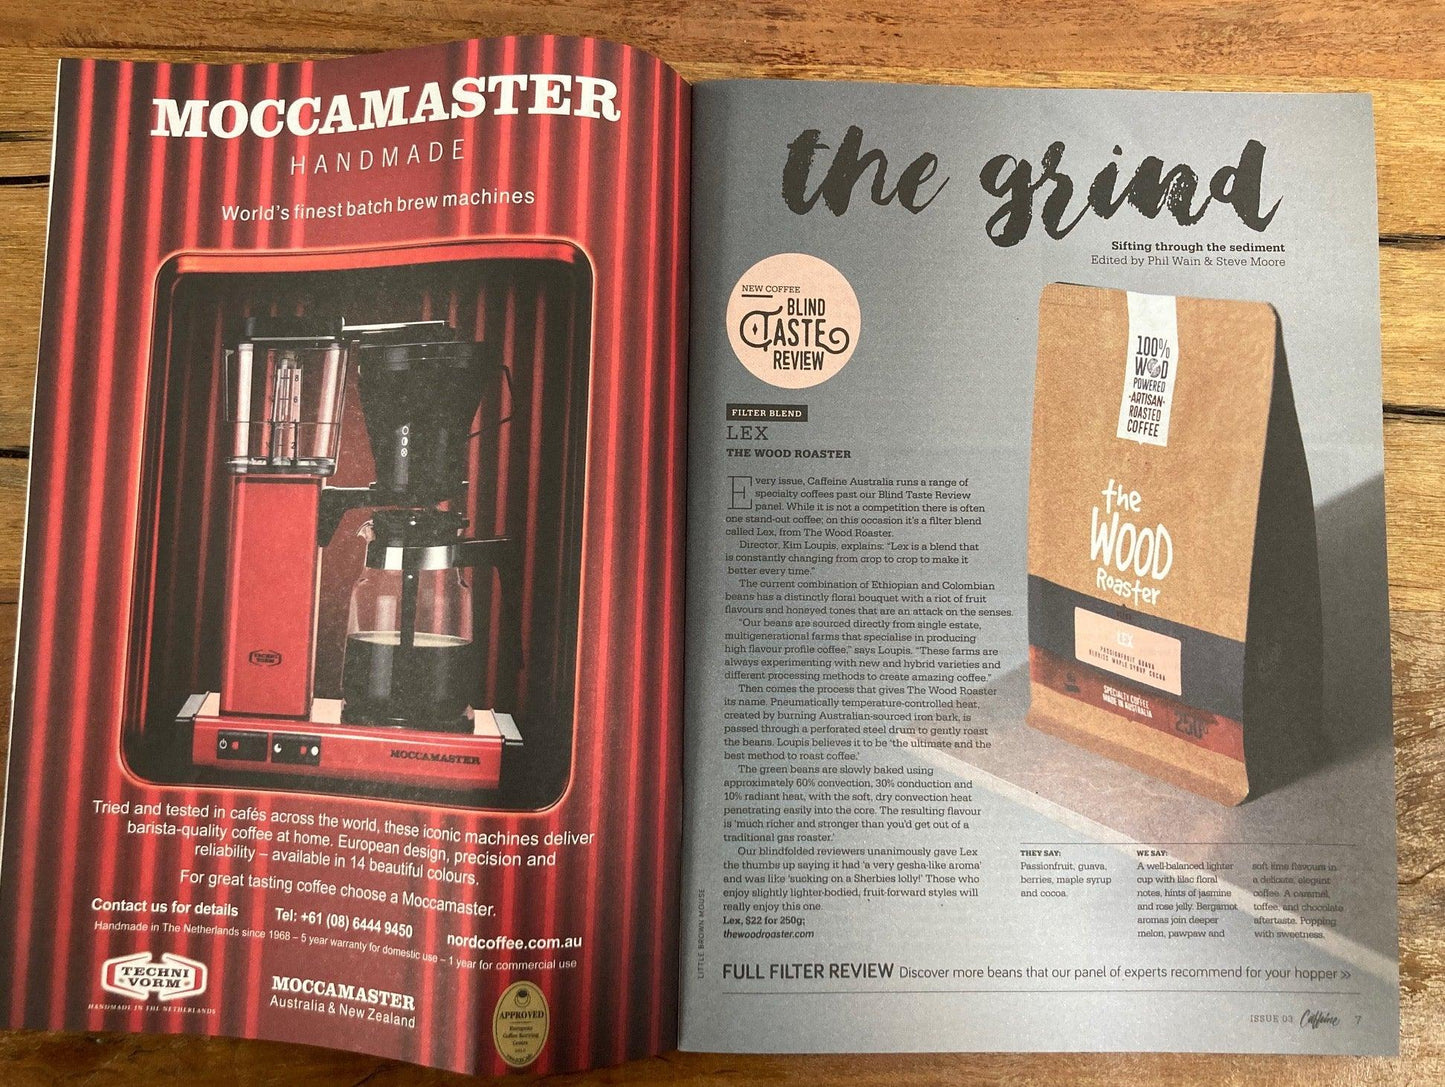 We were featured in Caffeine Magazine - Lex coffee review - The Wood Roaster